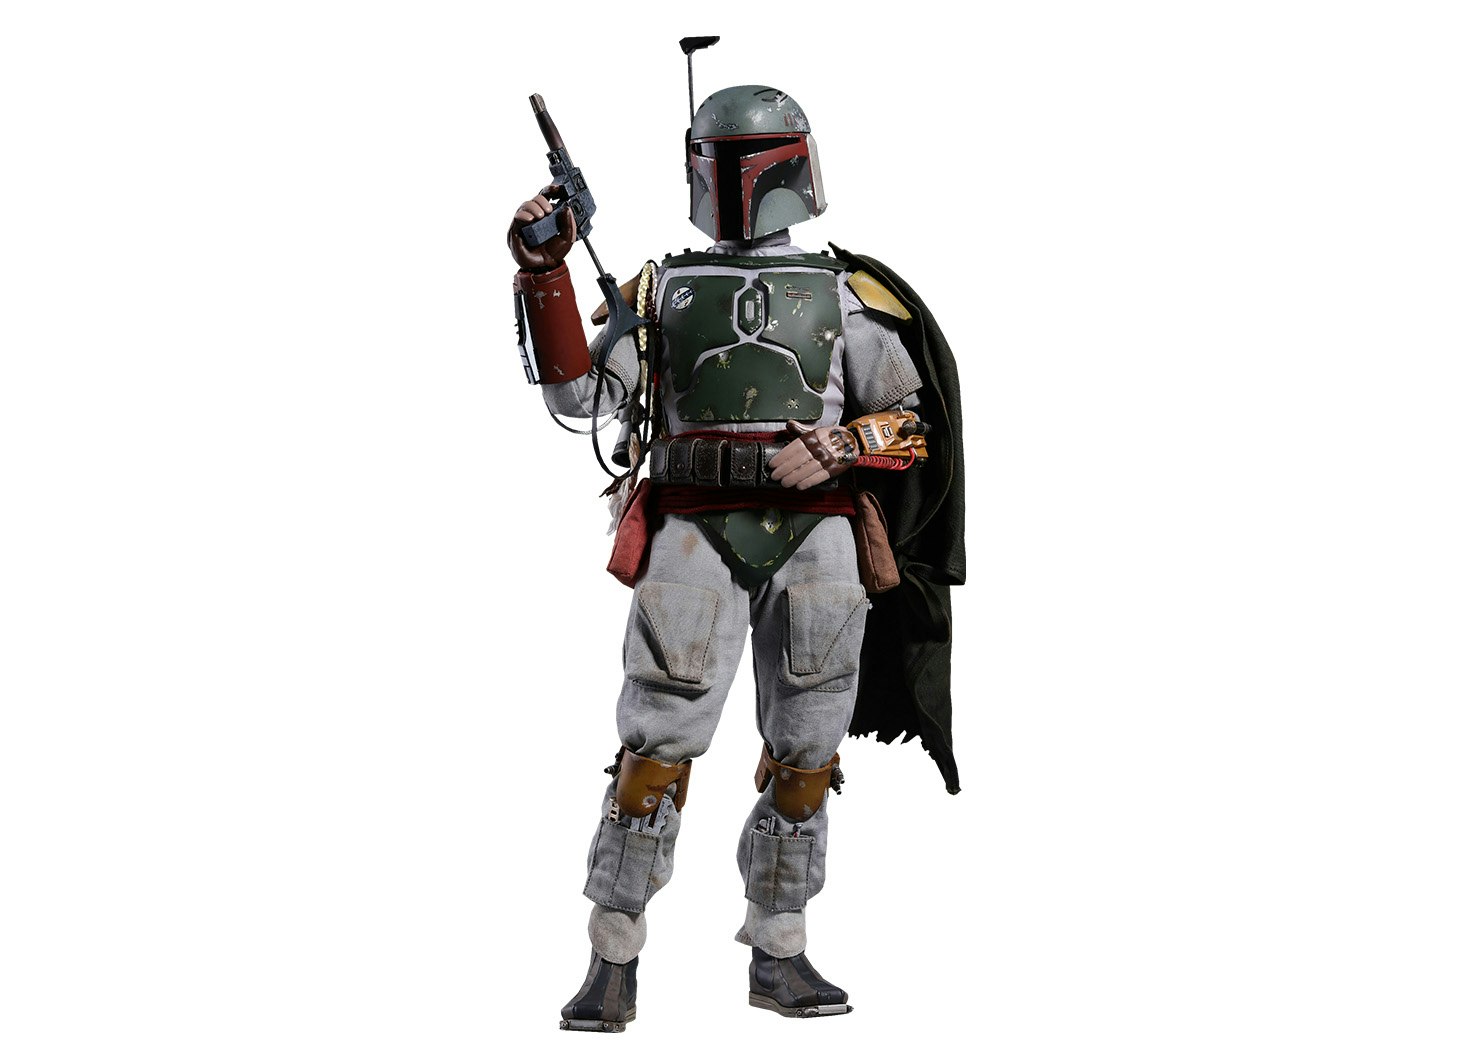 HOT TOYS STAR WARS 40TH ANNIVERSARY BOBA FETT SIXTH SCALE FIGURE NEW IN BOX